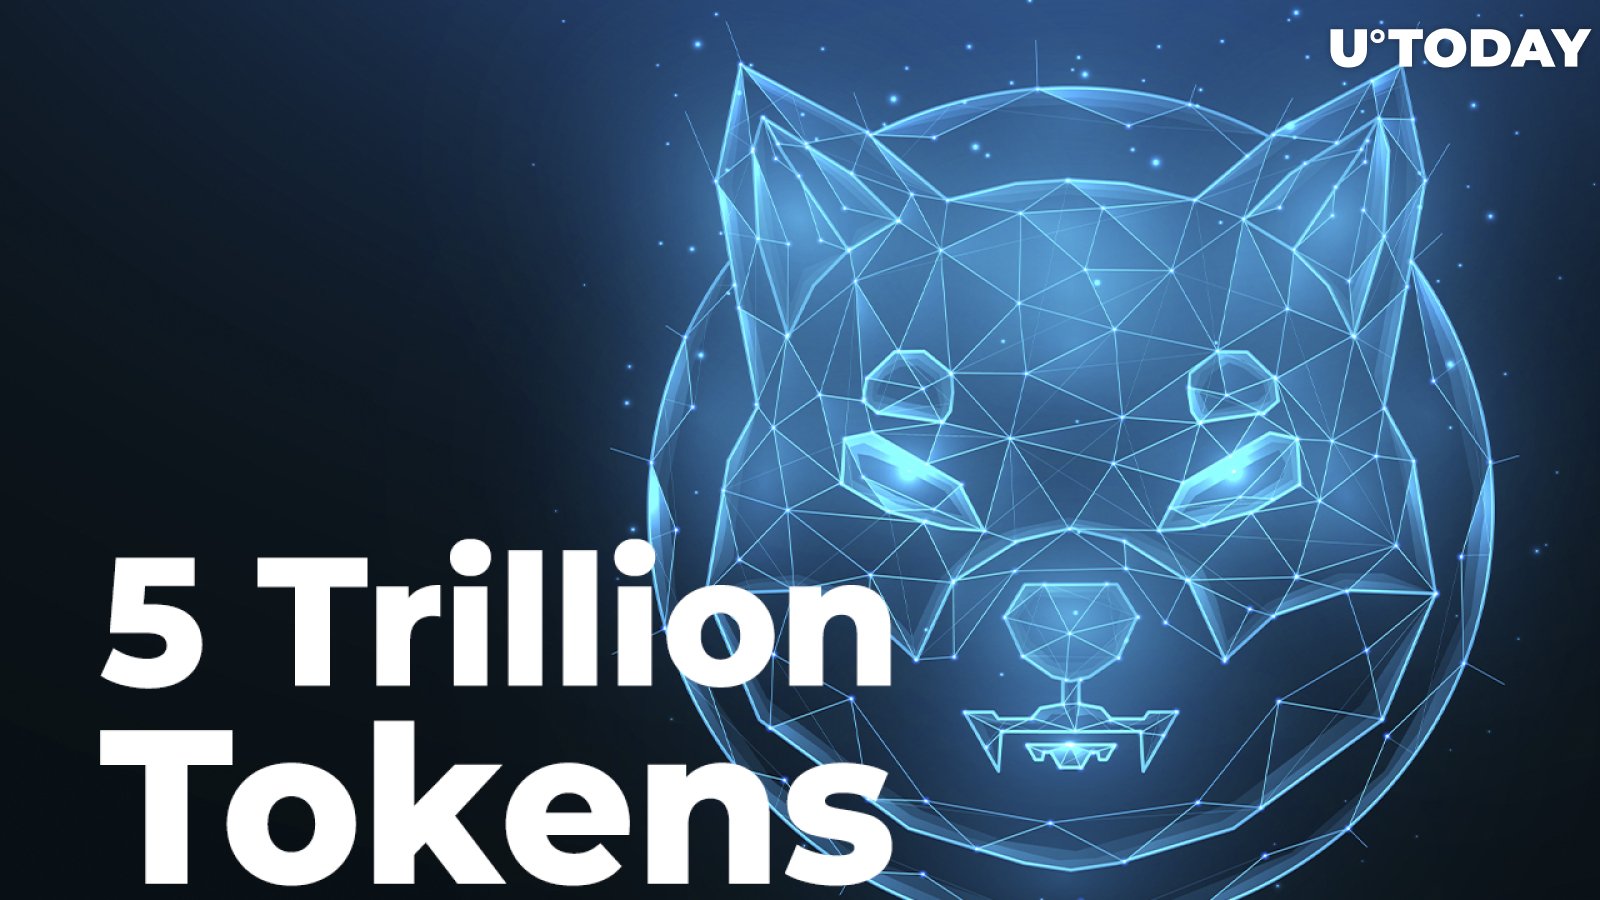 Shiba Inu Whale With 5 Trillion Tokens Expands Holdings; Here's What He Bought